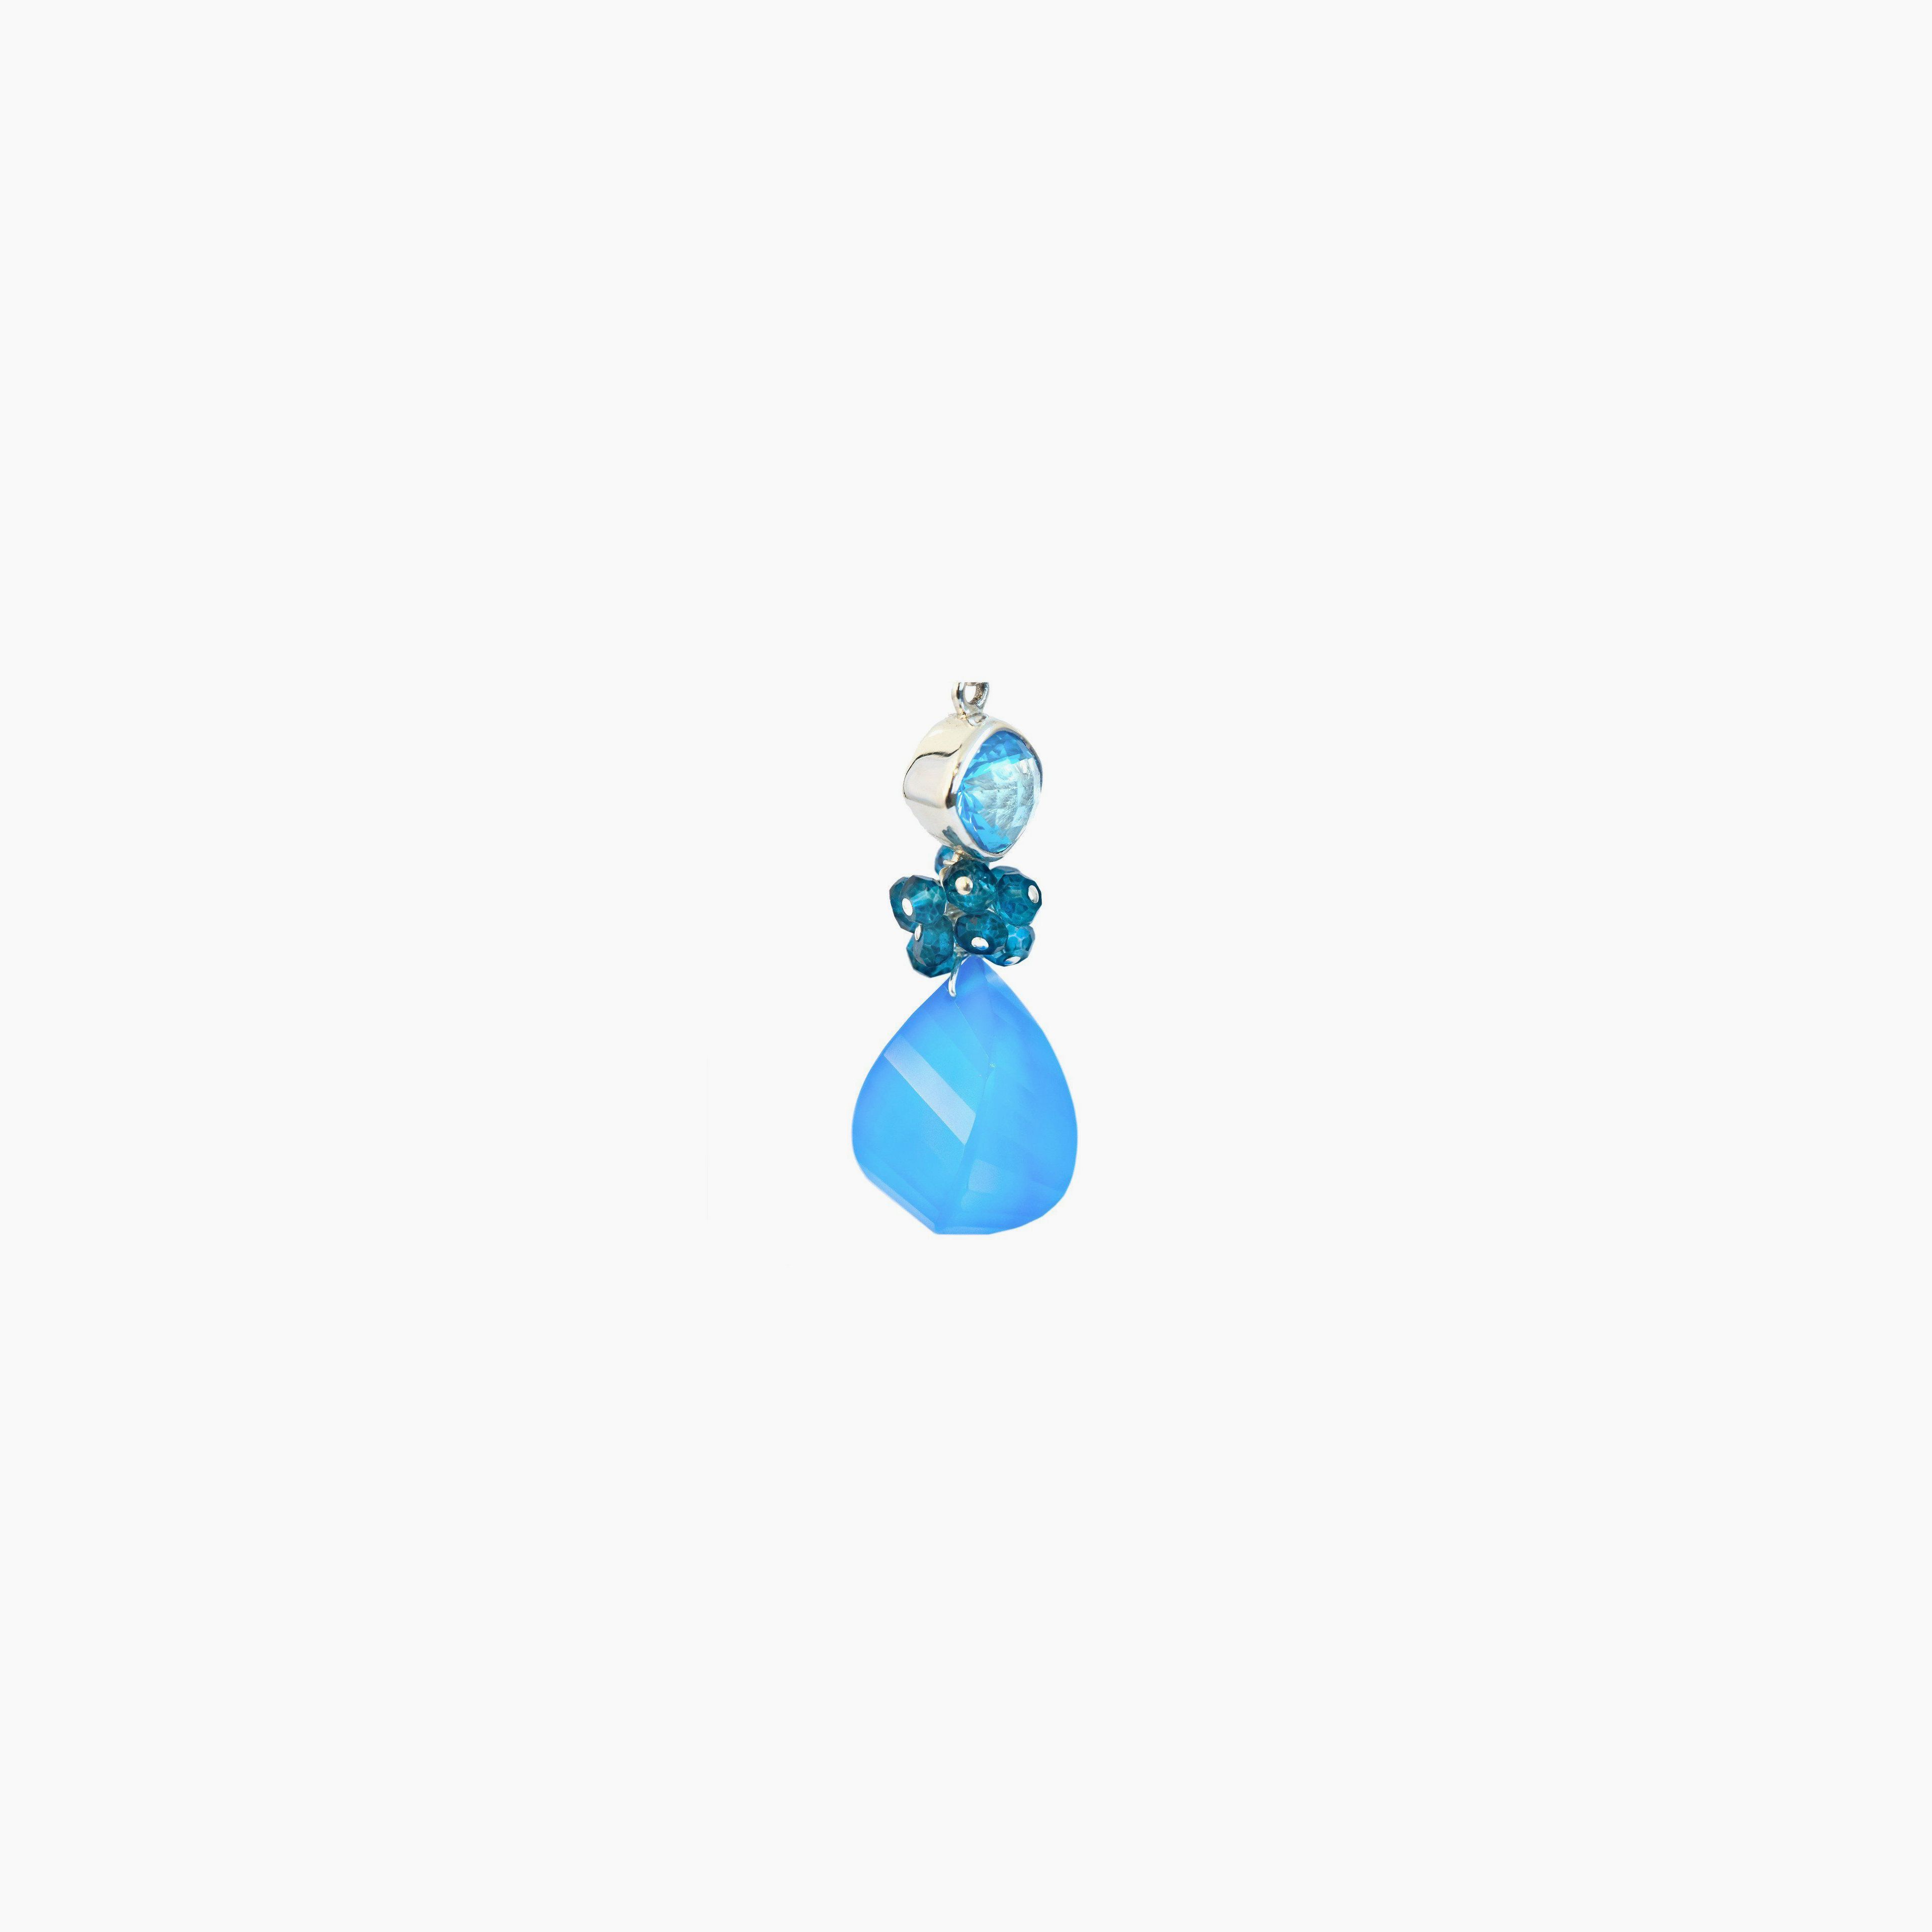 Chalcedony and Blue Topaz Fantasy Drop Earrings